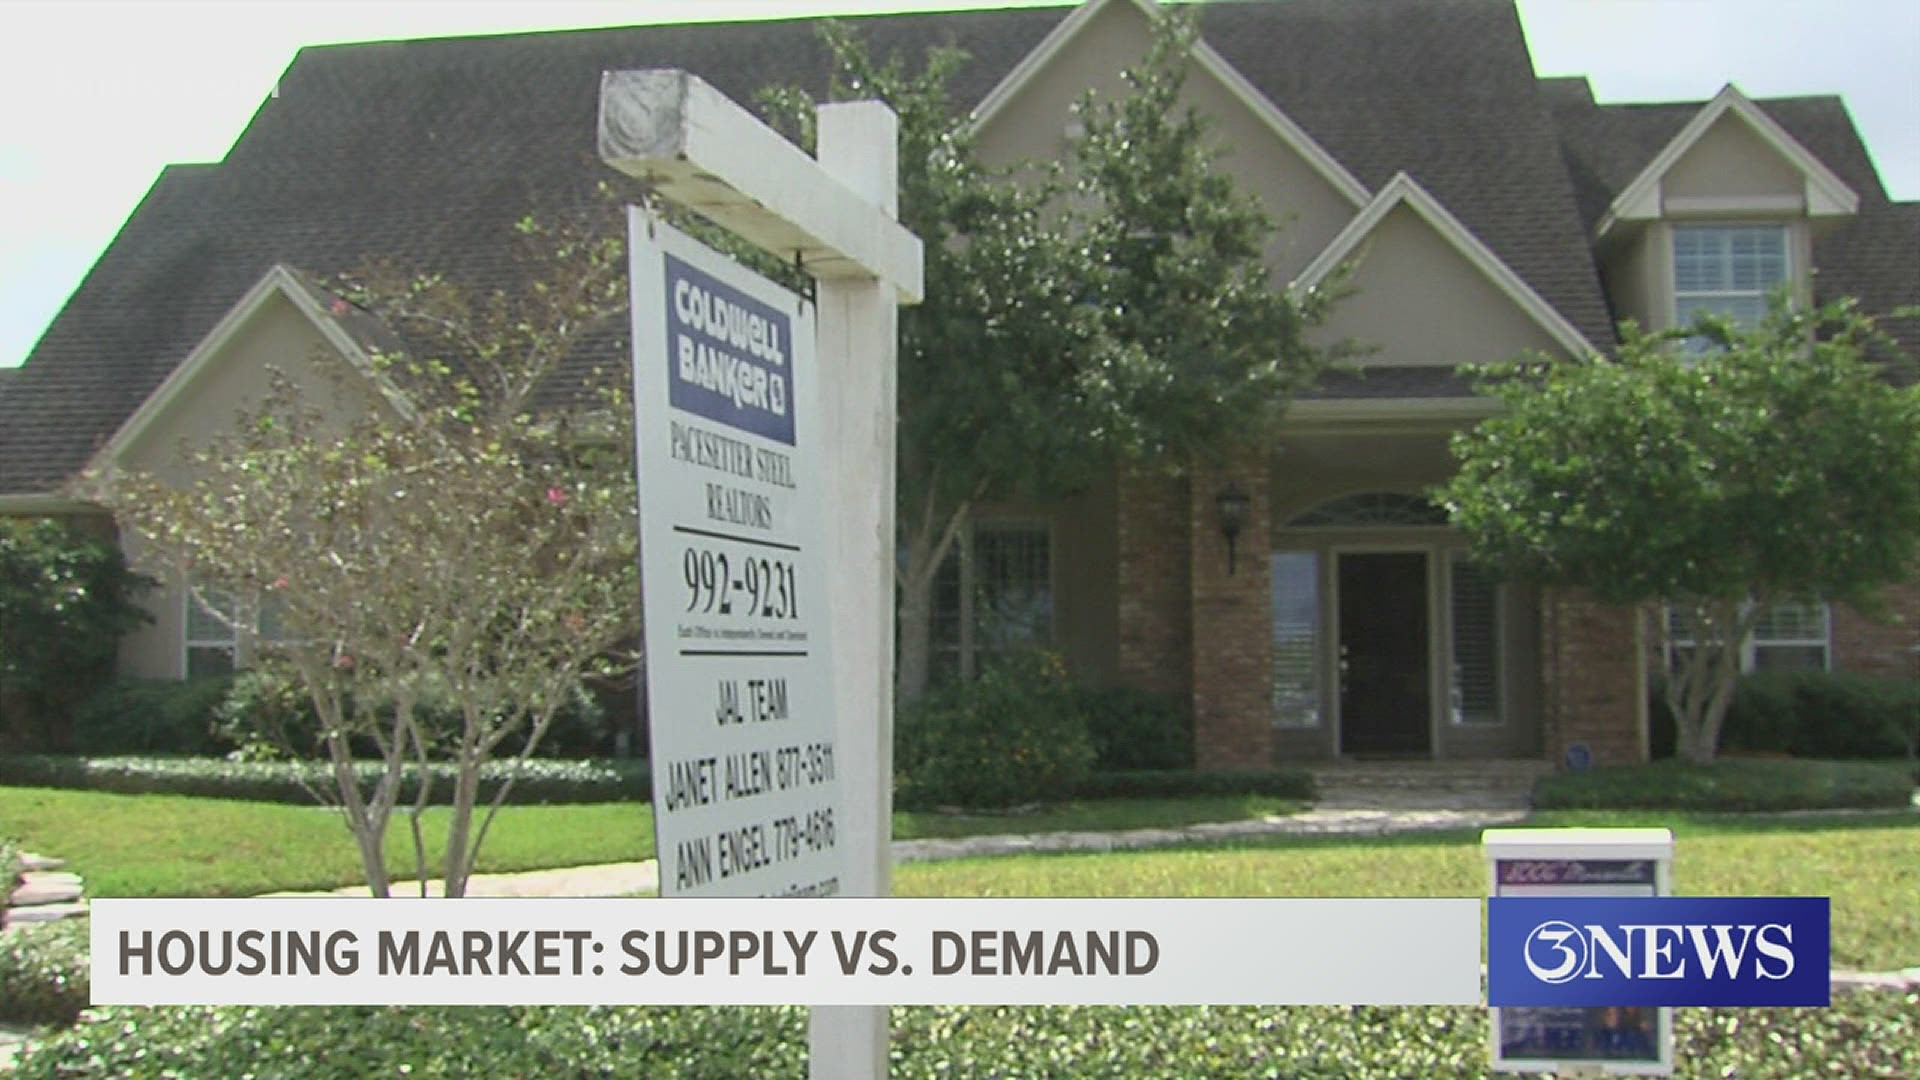 A few months ago, was a good time to buy a home in Corpus Christi because of low interest rates. Well, now, there are plenty of new homeowners.